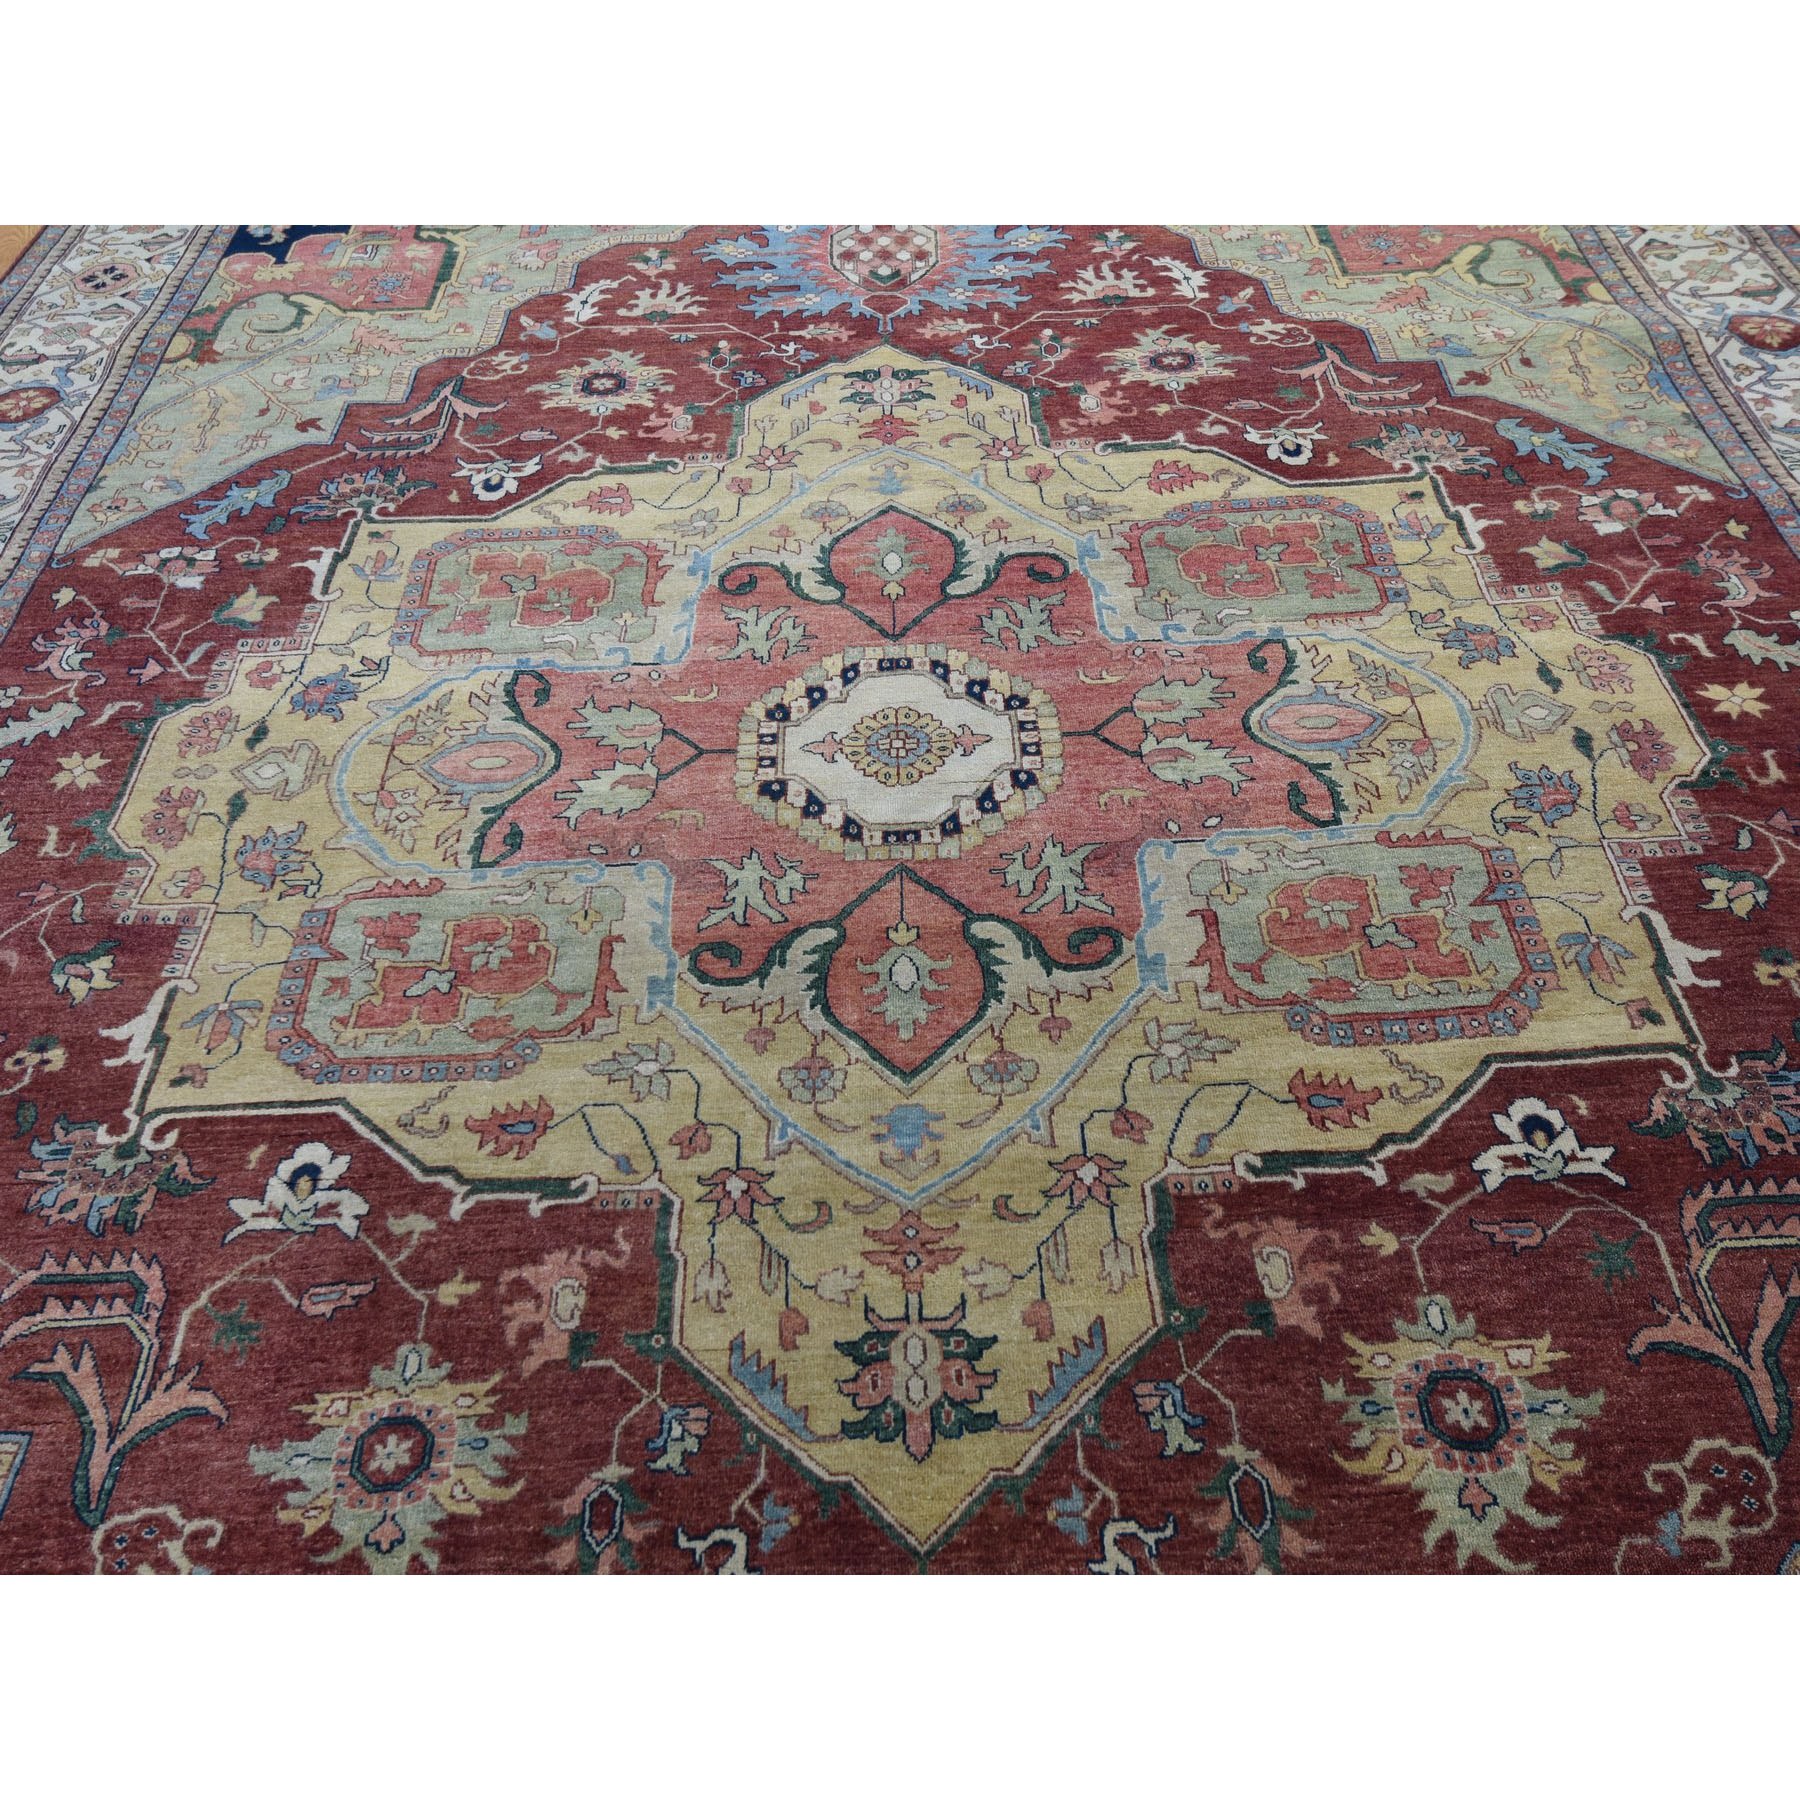 10-x14- Antiqued Heriz Re-Creation Pure Wool Hand Knotted Oriental Rug 